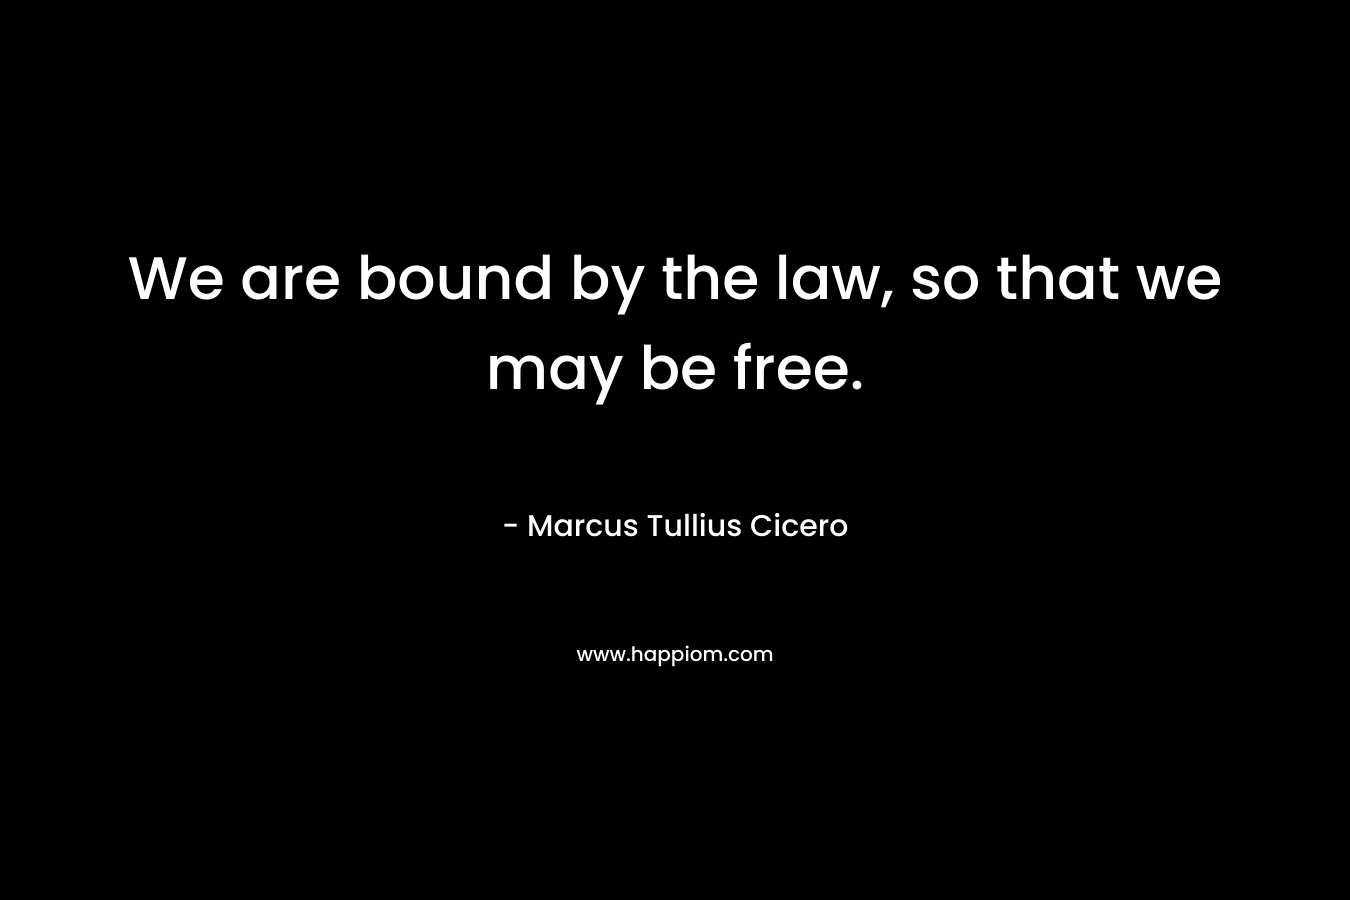 We are bound by the law, so that we may be free. – Marcus Tullius Cicero